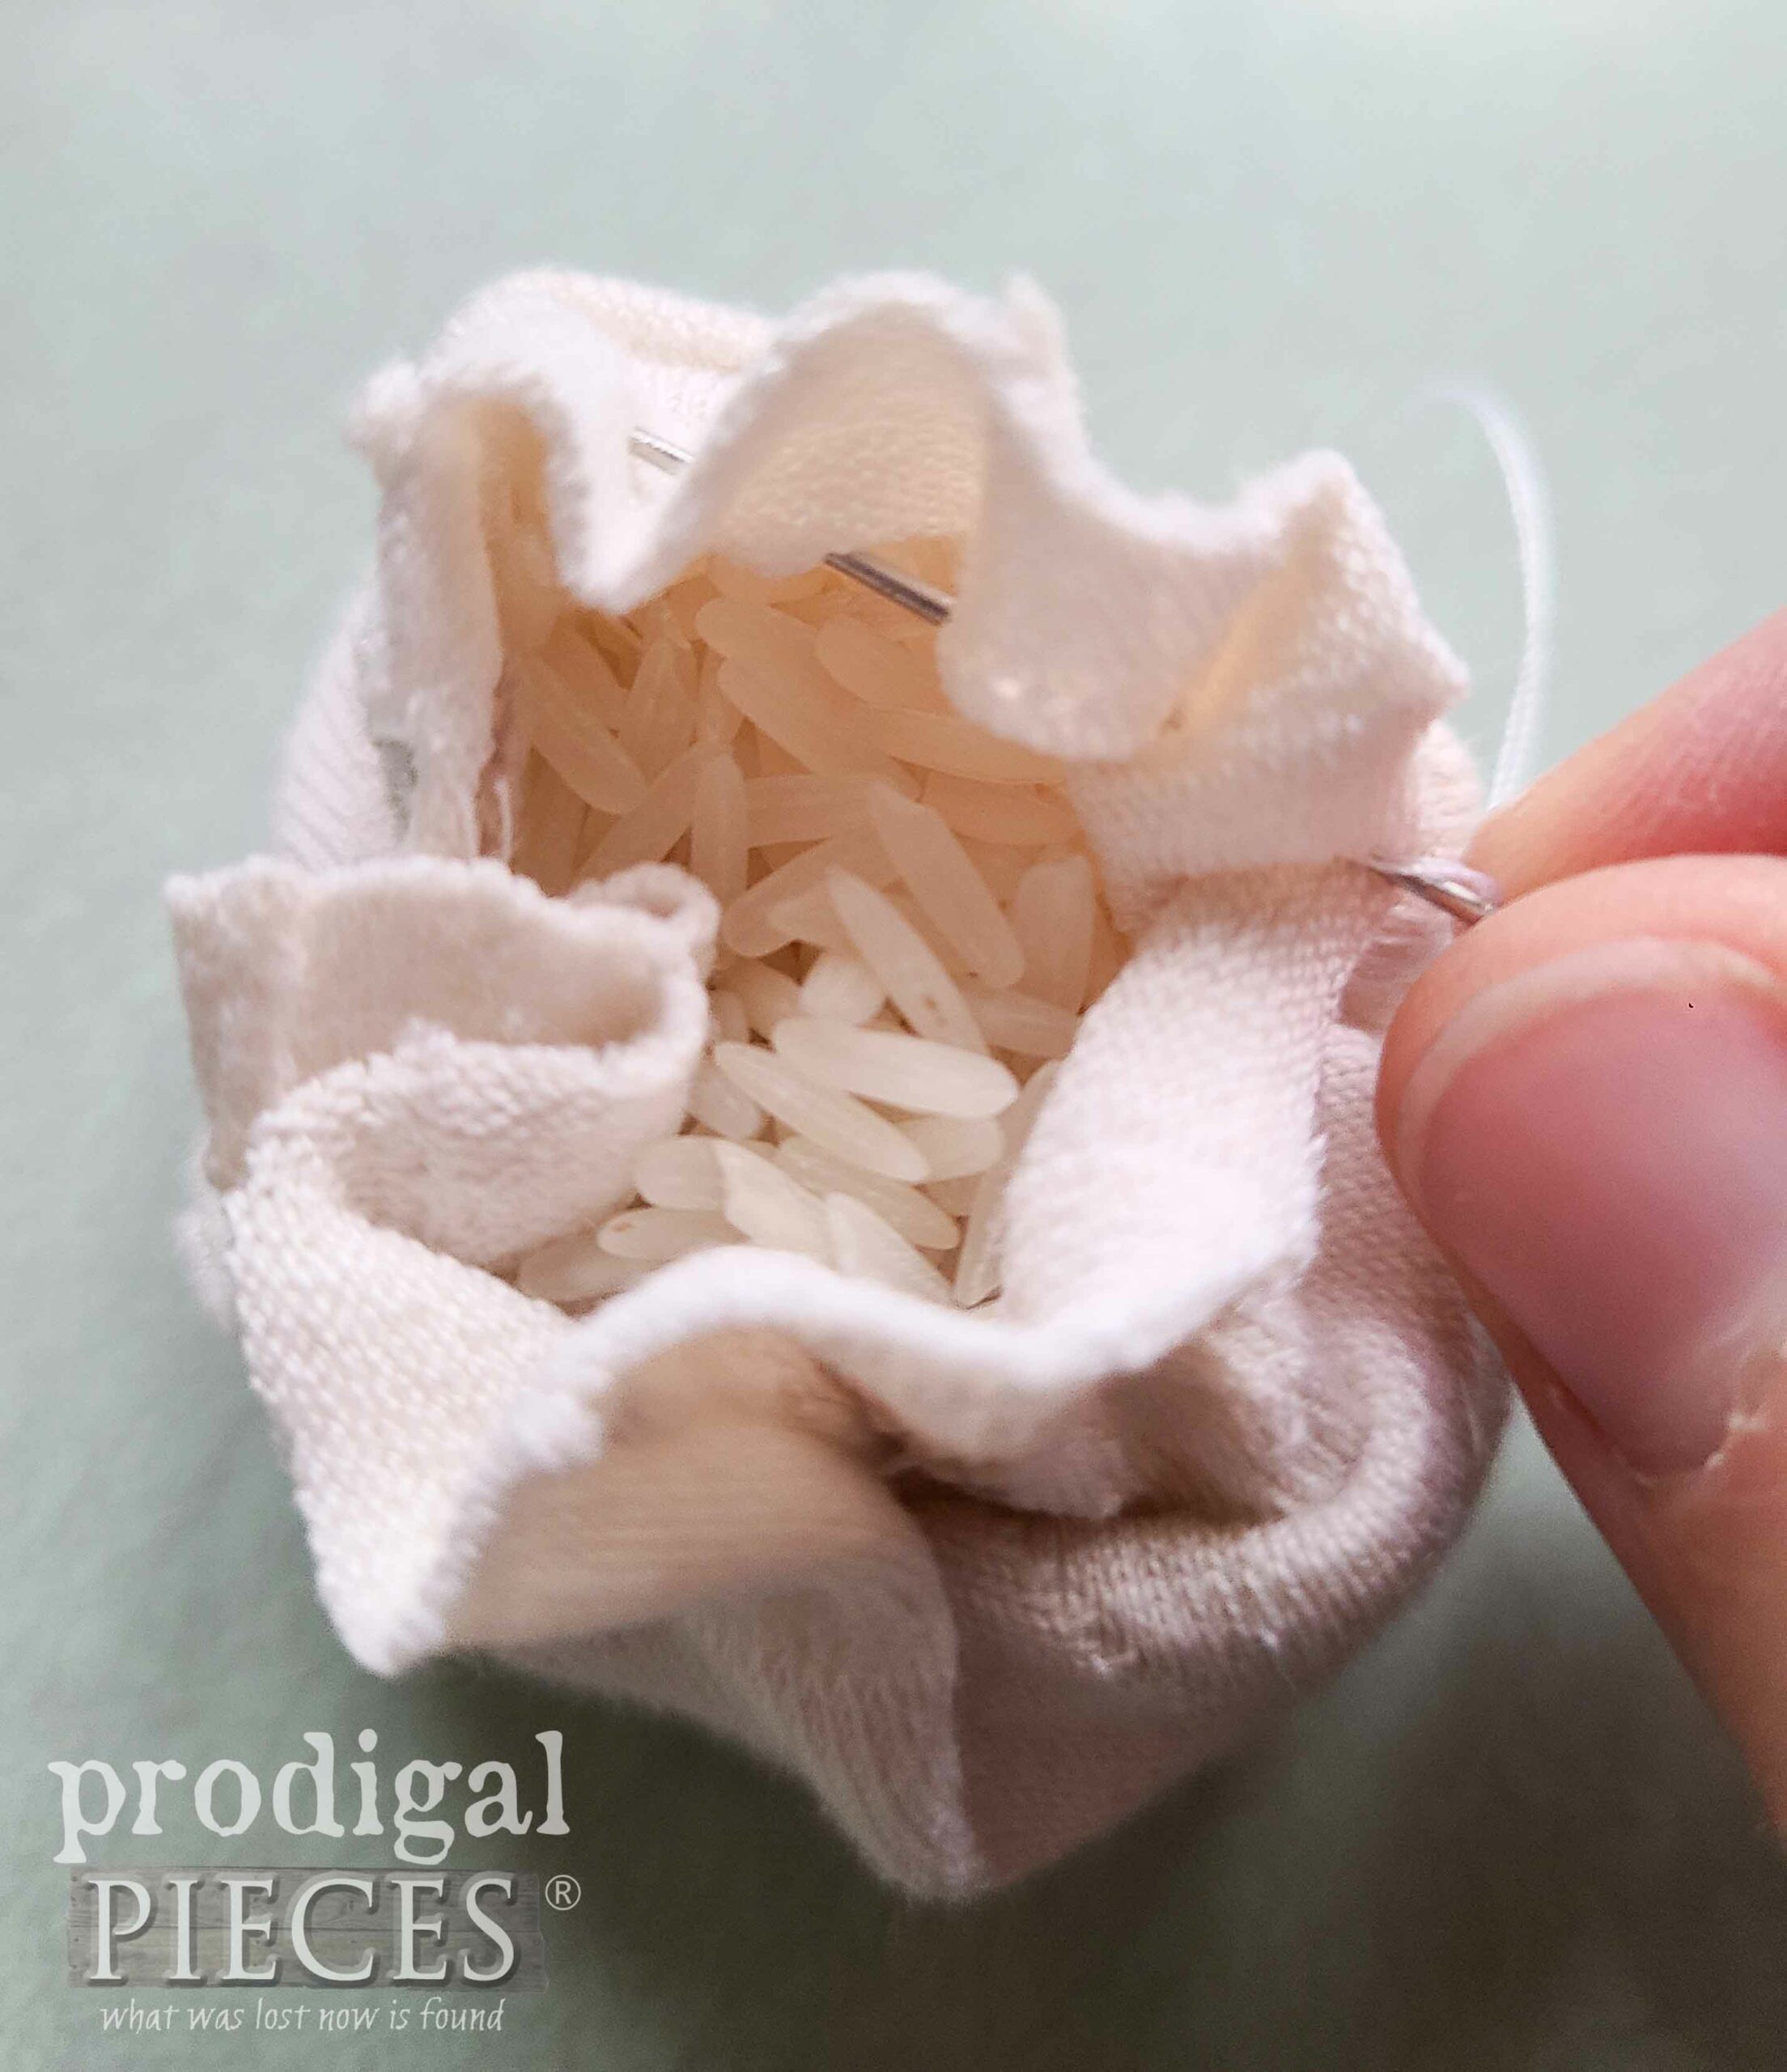 Rice Pack Inside Sock Doll for Stability | prodigalpieces.com #prodigalpieces